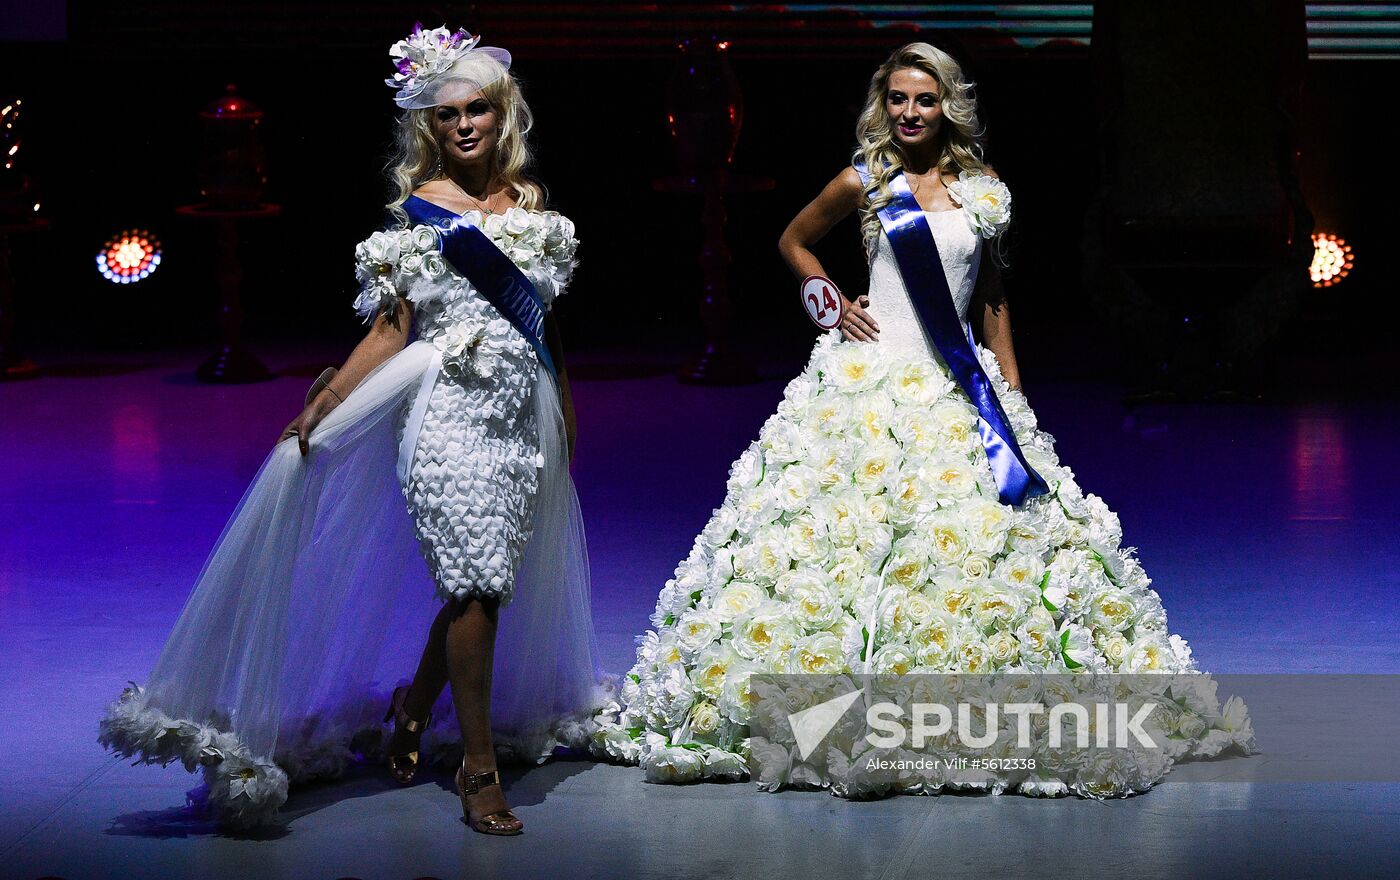 Mrs. Russia 2018 beauty pageant